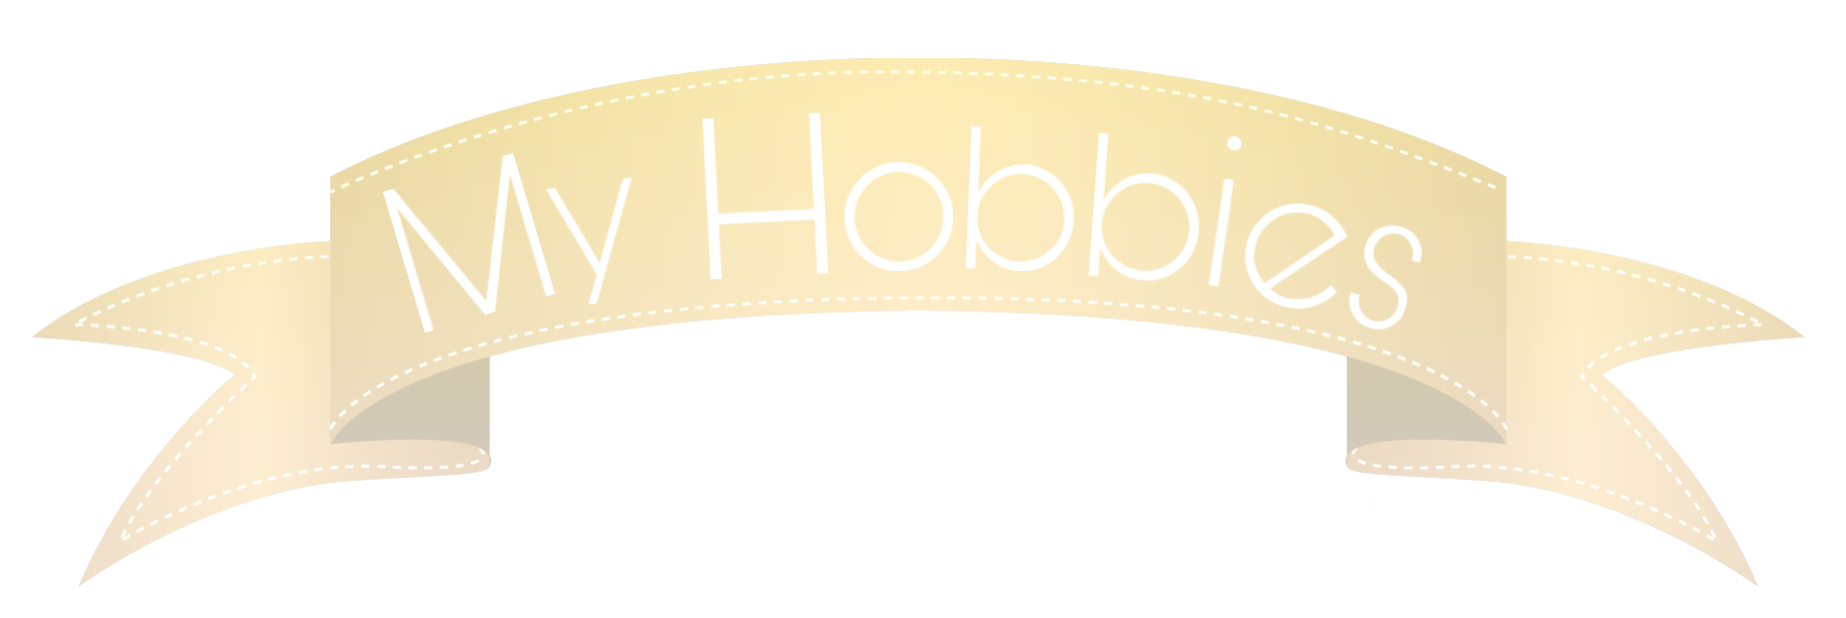 banner that says my hobbies